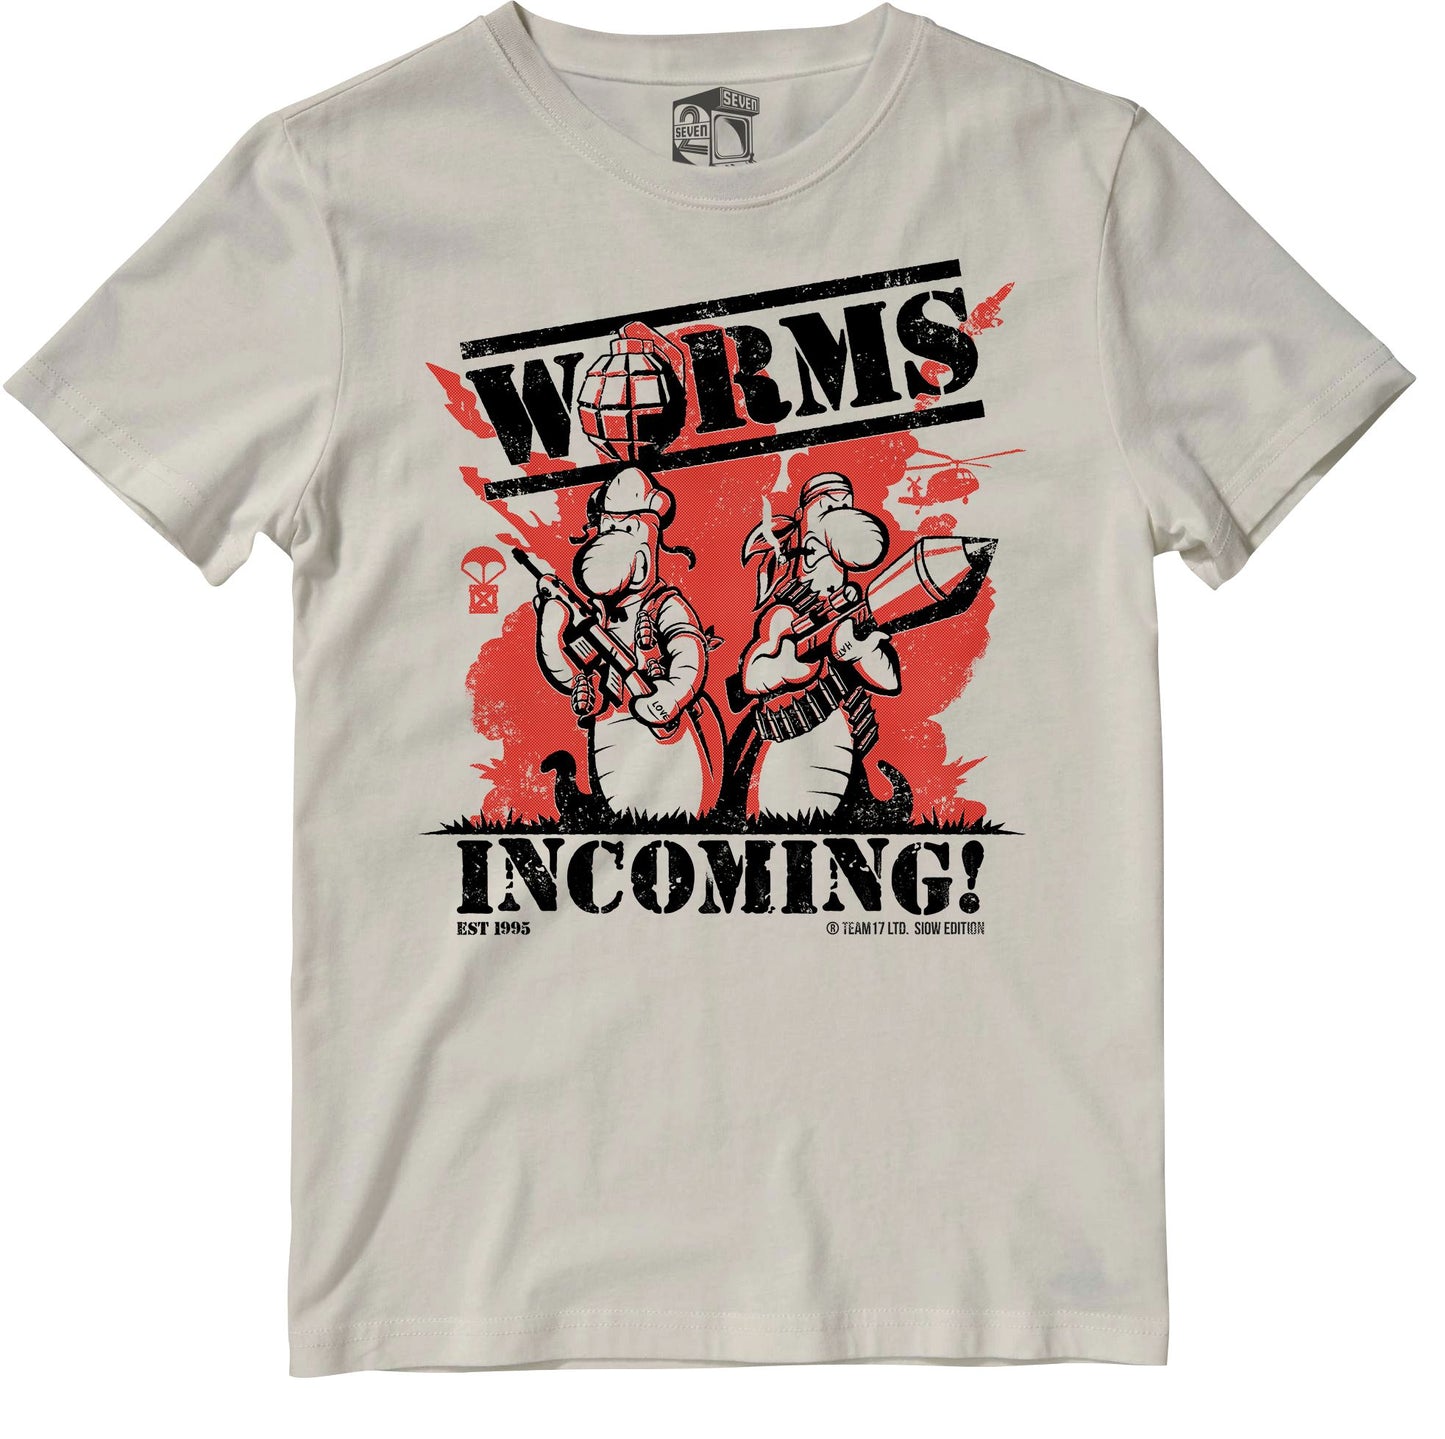 WORMS Incoming Retro Gaming T-Shirt (SIOW Edition) T-Shirt Seven Squared 